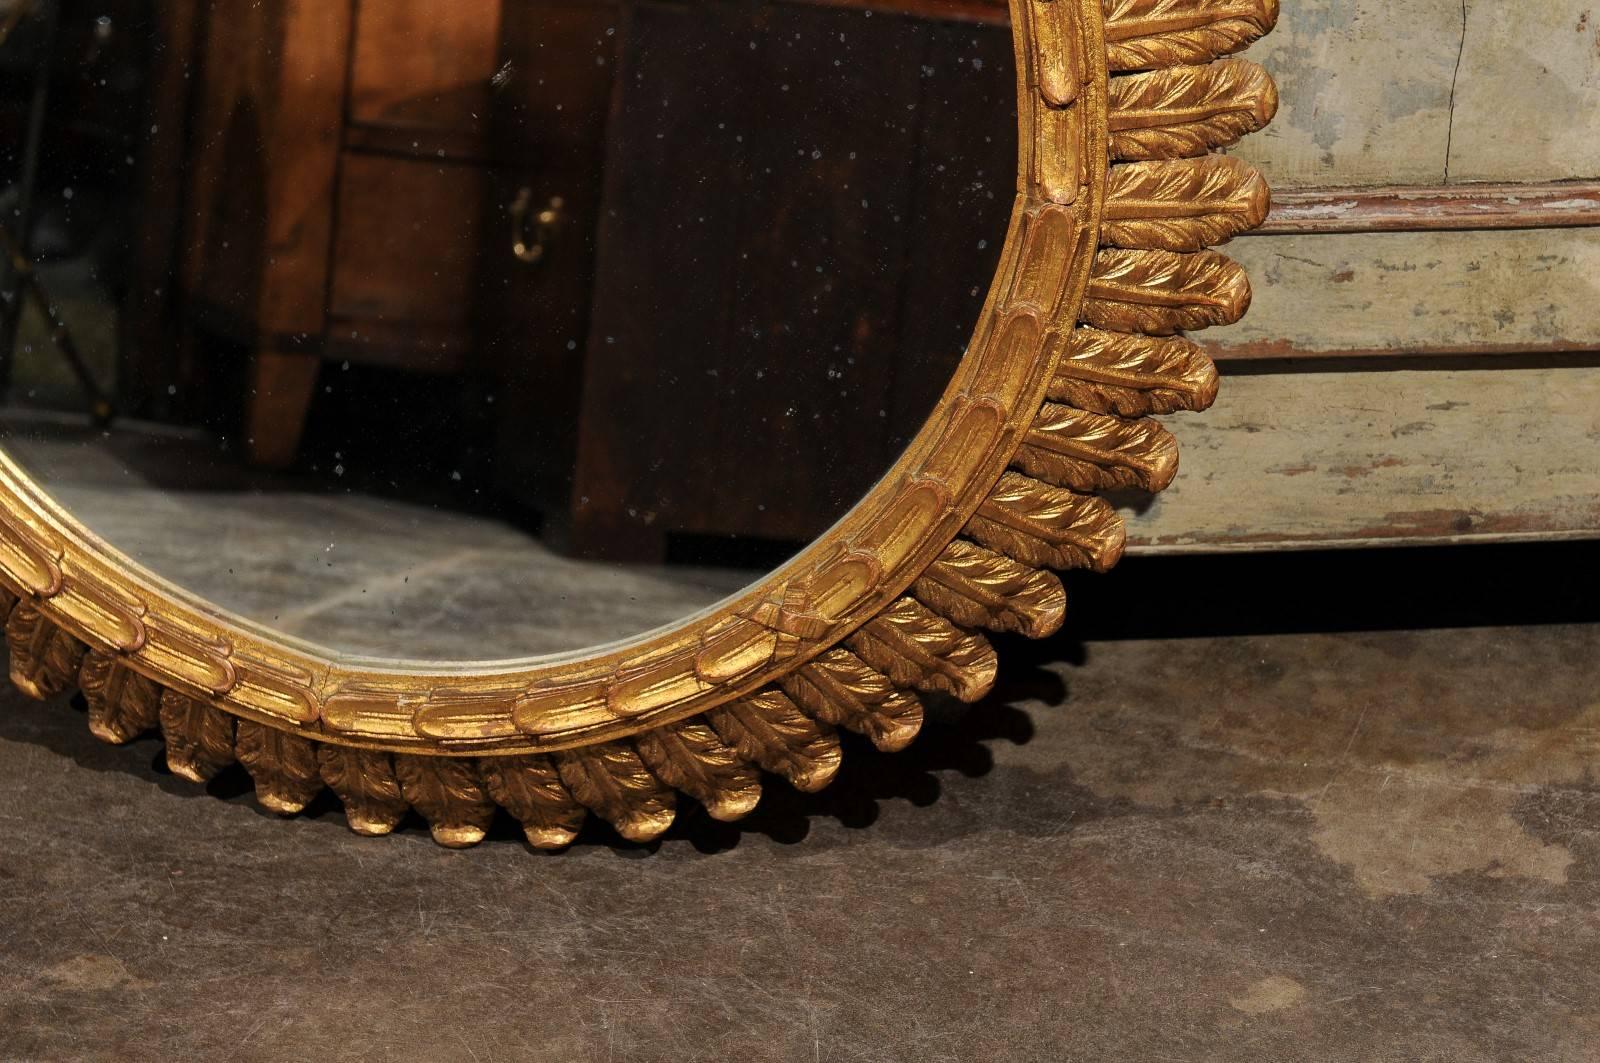 20th Century French Round Giltwood Mirror with Carved Waterleaves and Clear Glass, circa 1950